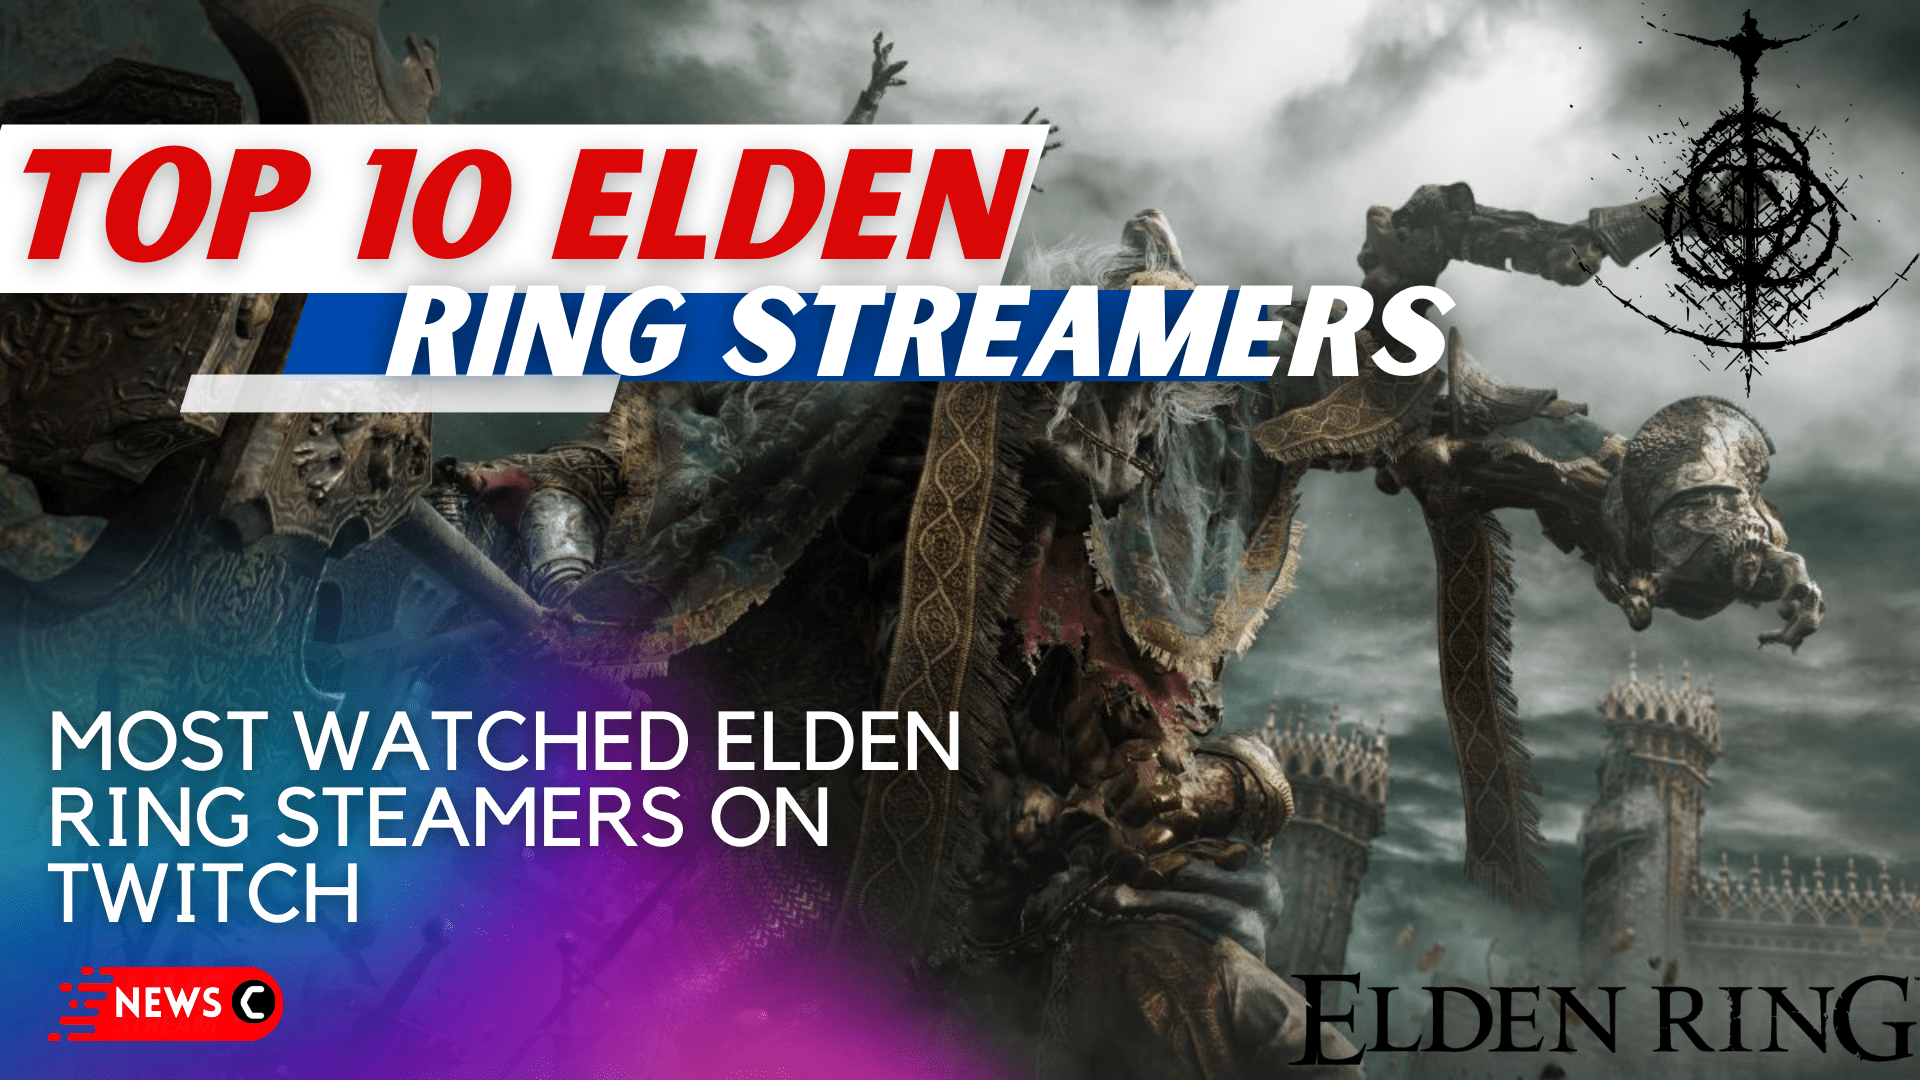 Top 10 Elden Ring streamers on Twitch